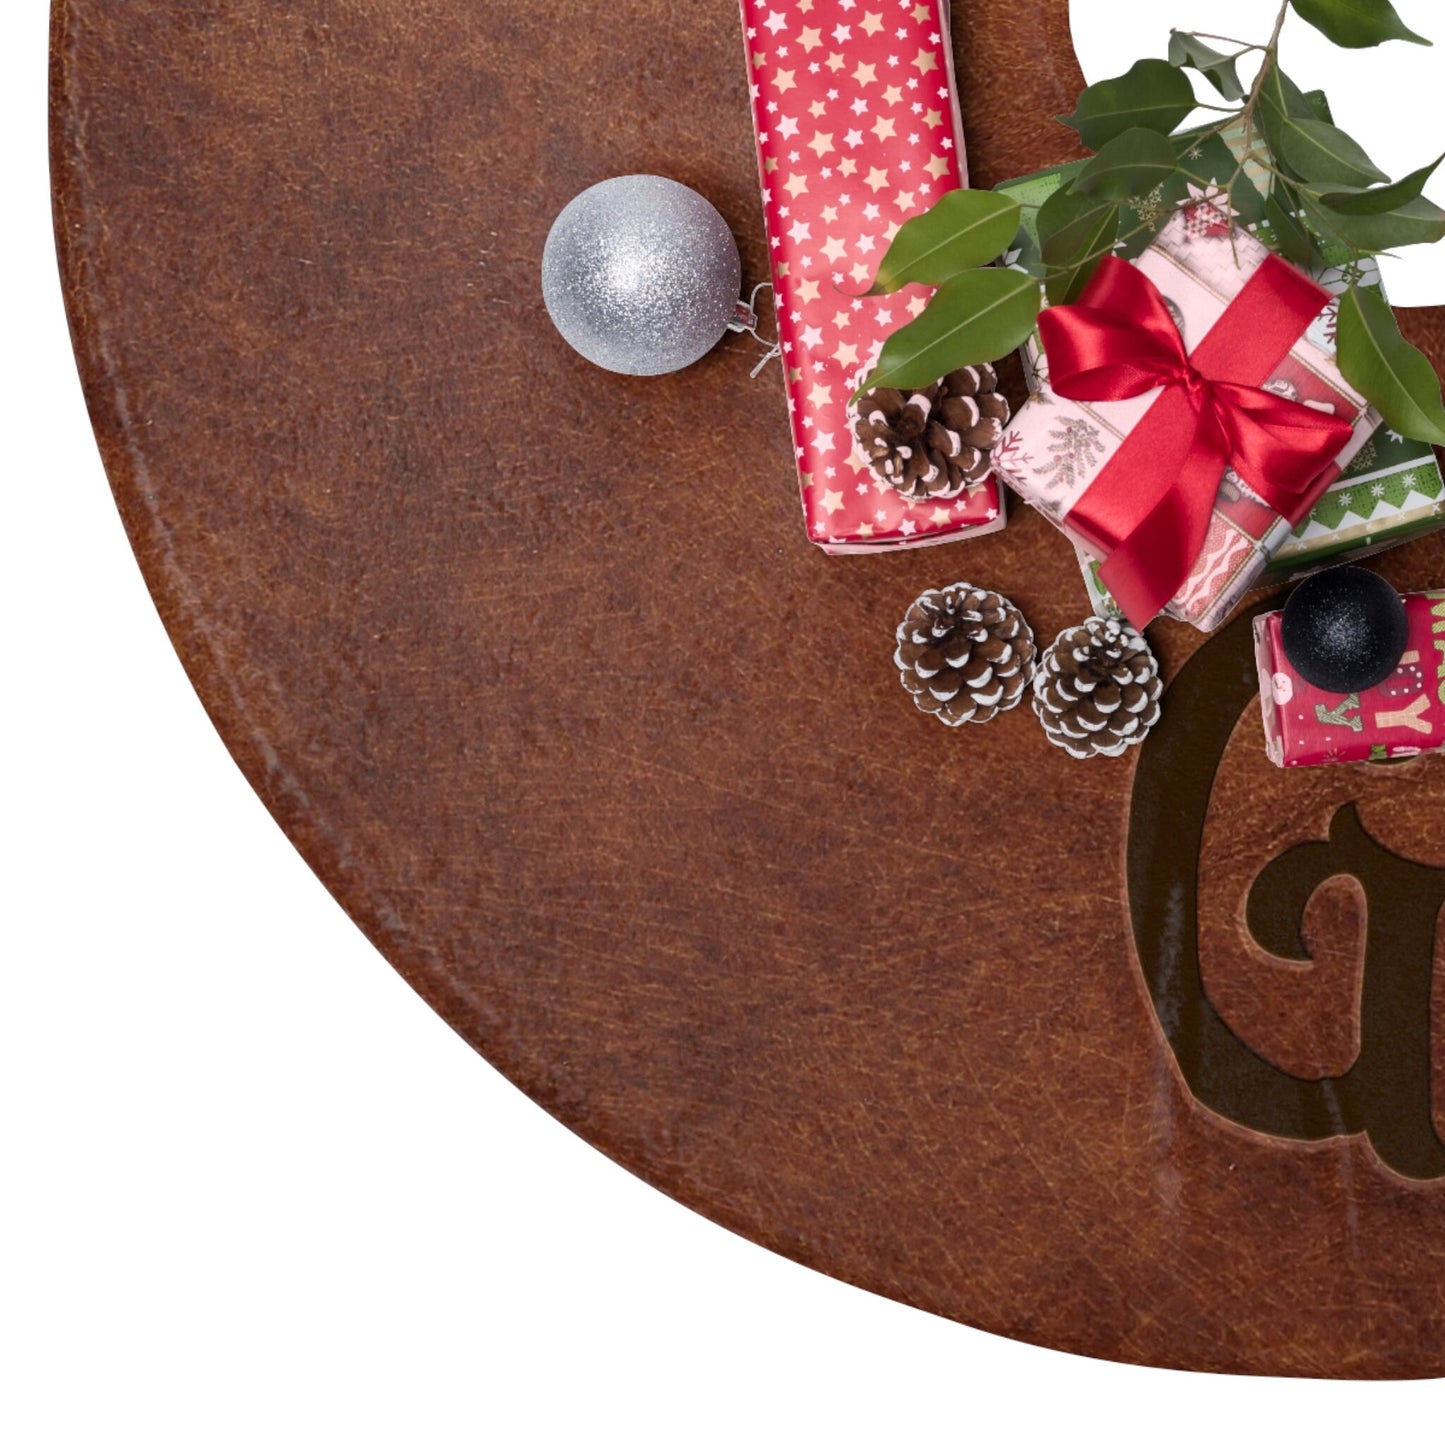 CUSTOM Monogram Christmas Tree Skirts Stamped Leather Looking Printed Unique Family Holiday Decorations